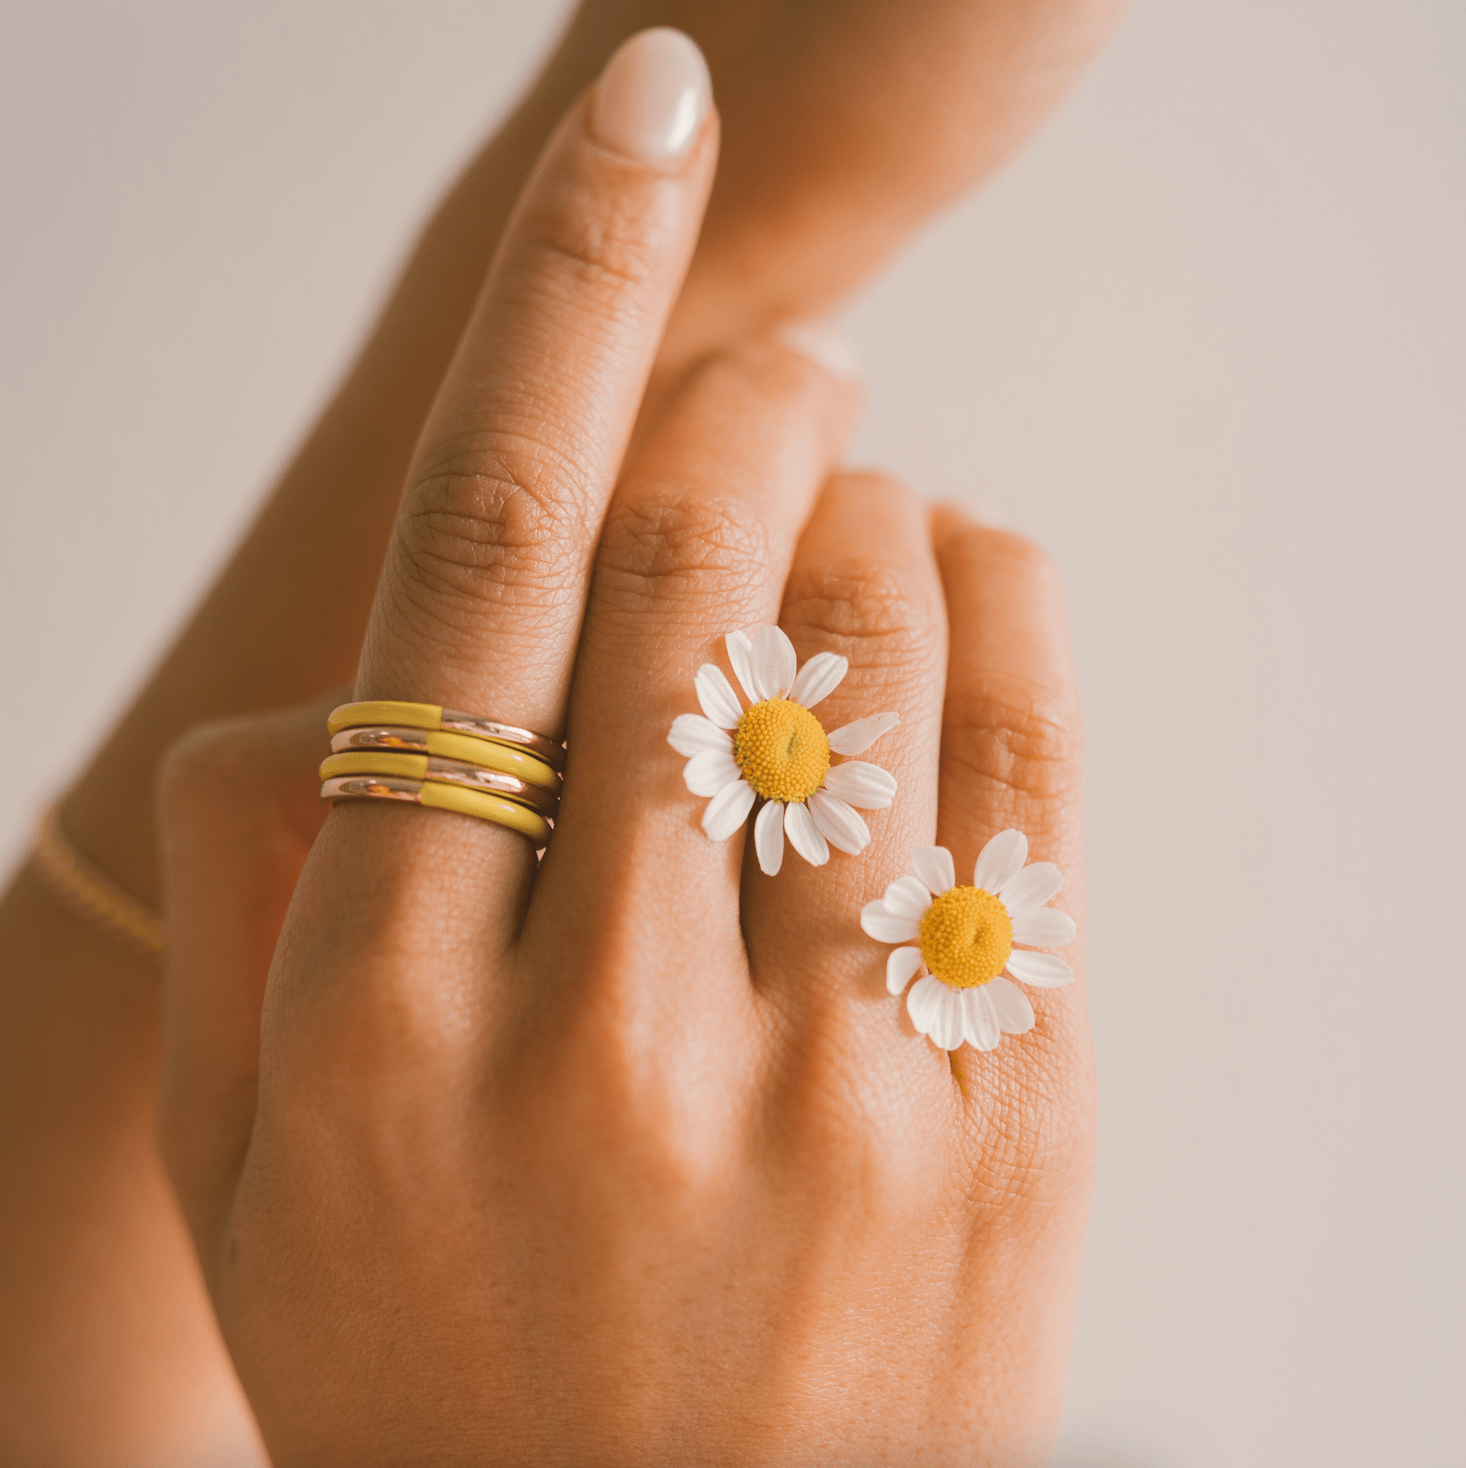 Good Vibes Stacking Ring | Final Sale Ring